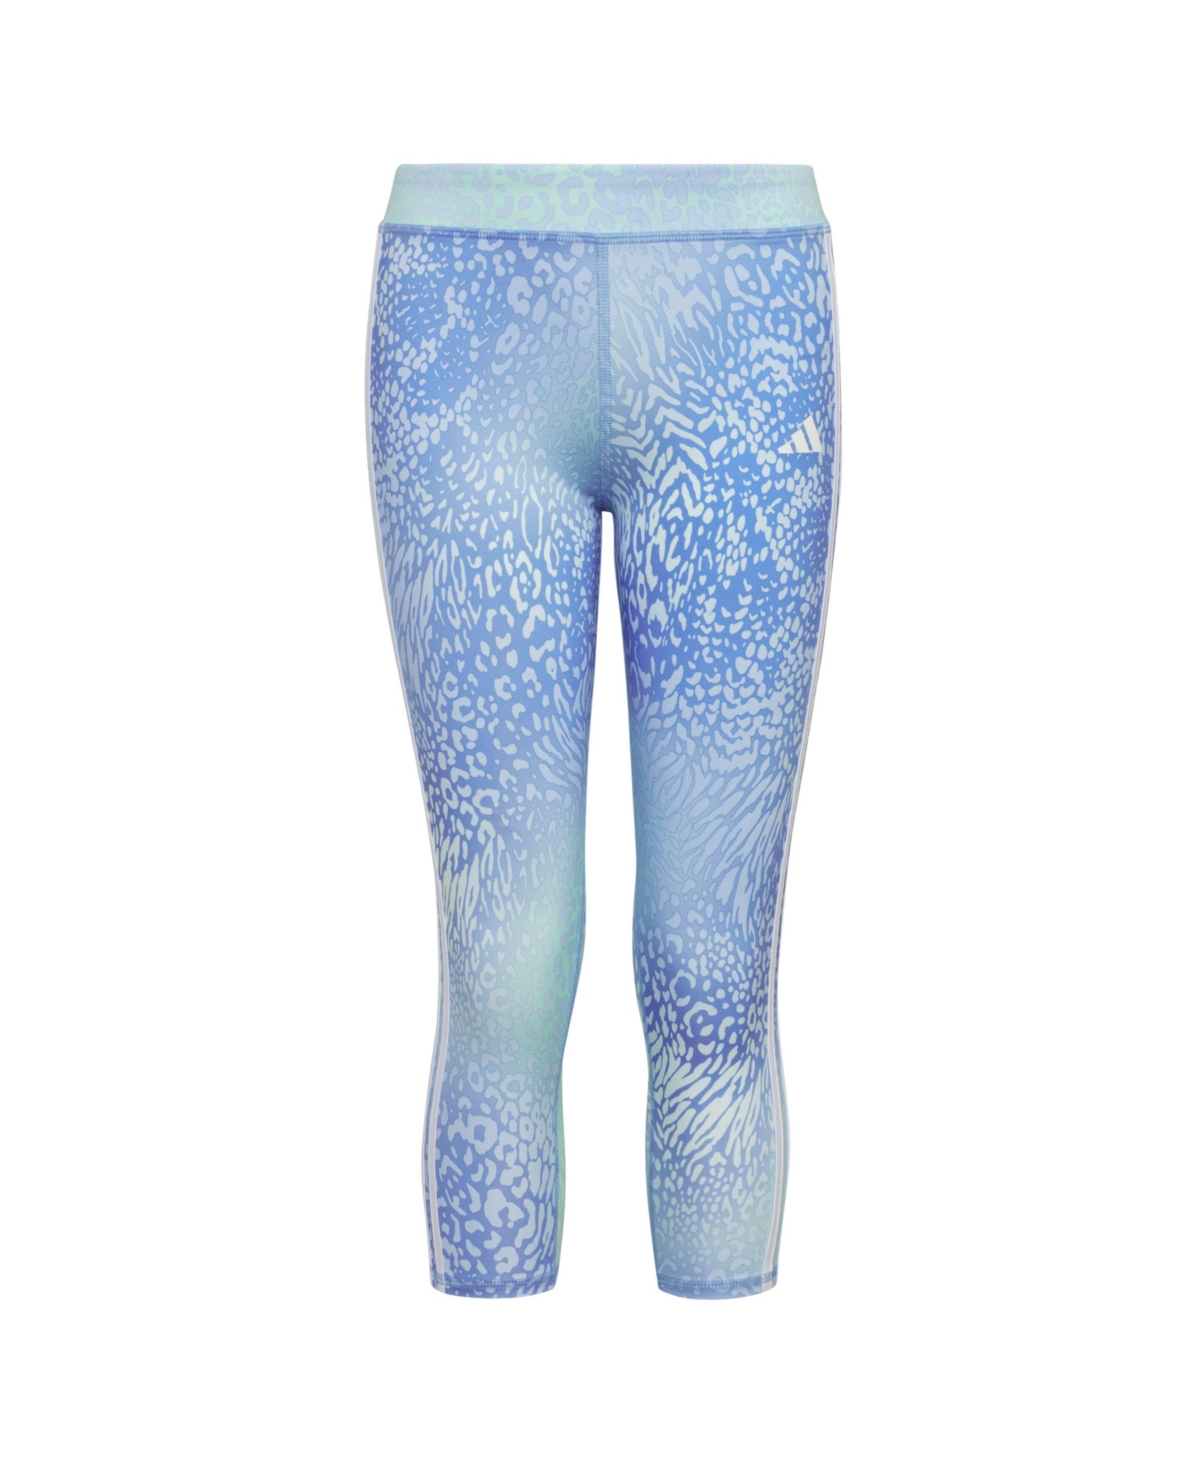 Adidas Originals Big Girls Aeroready All Over Print 3-stripes 7/8 Active Tights In Blue With Green